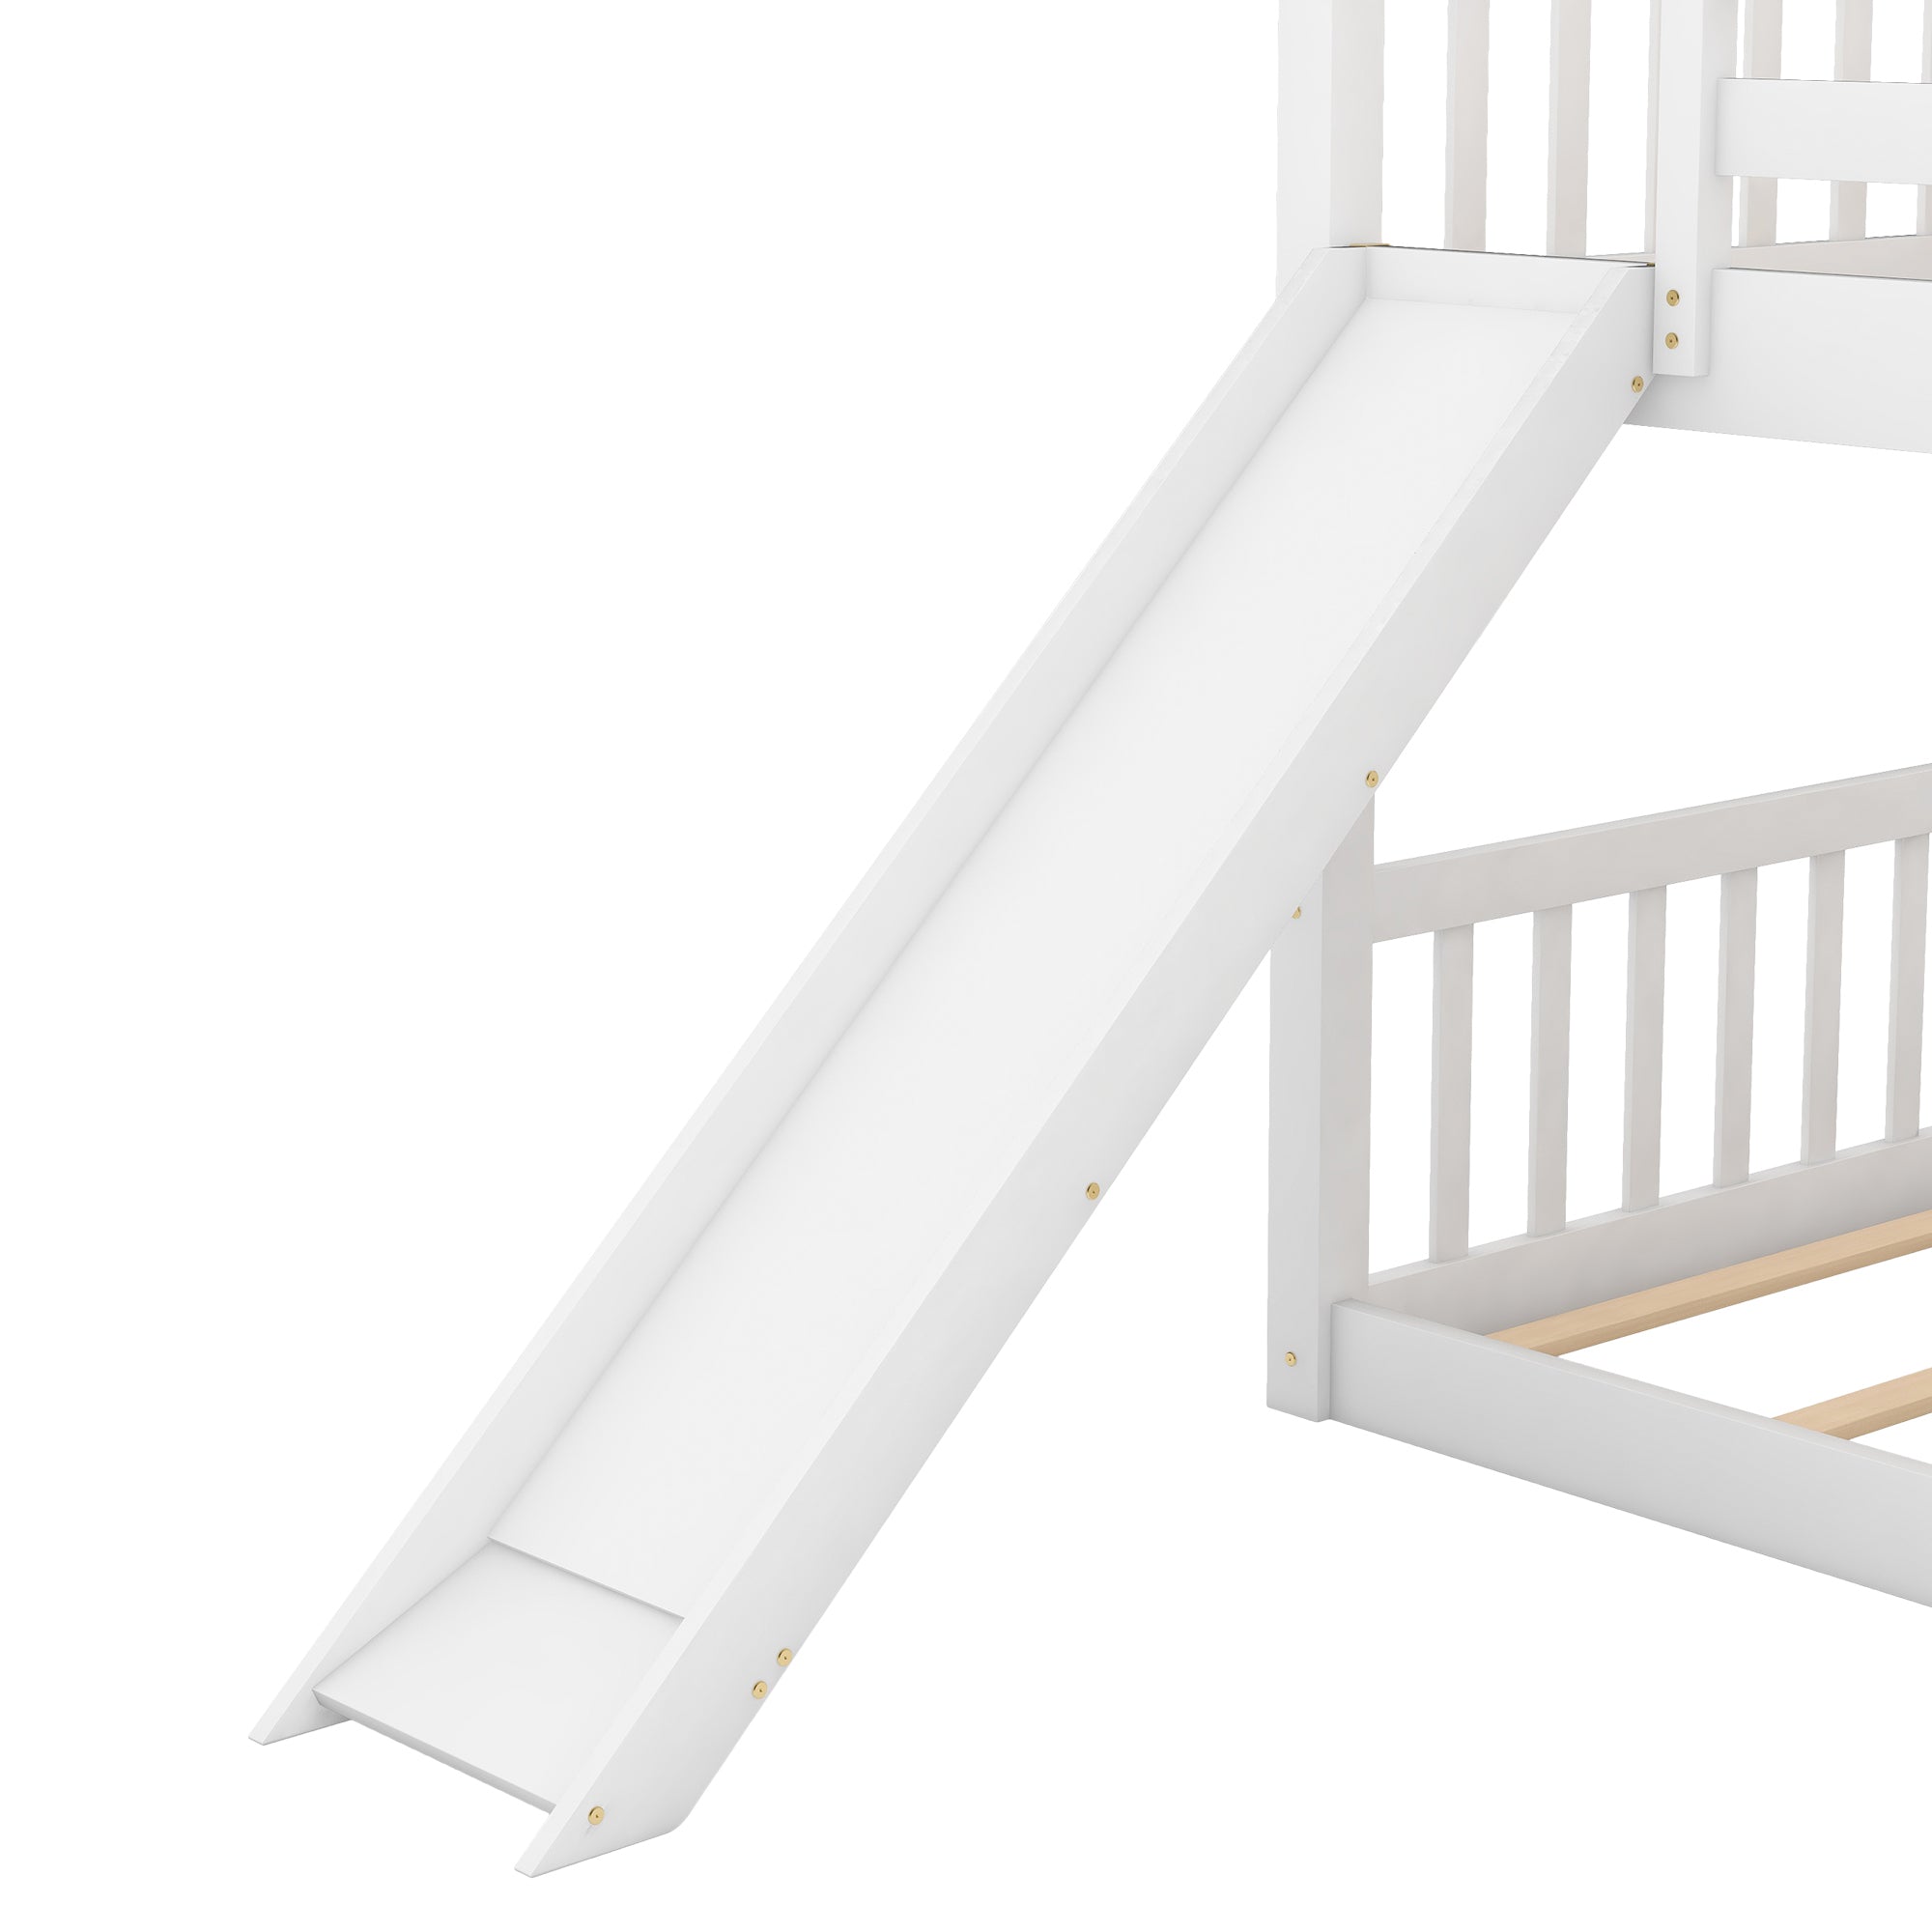 Twin over Twin Bunk Bed with Convertible Slide and Ladder (White)